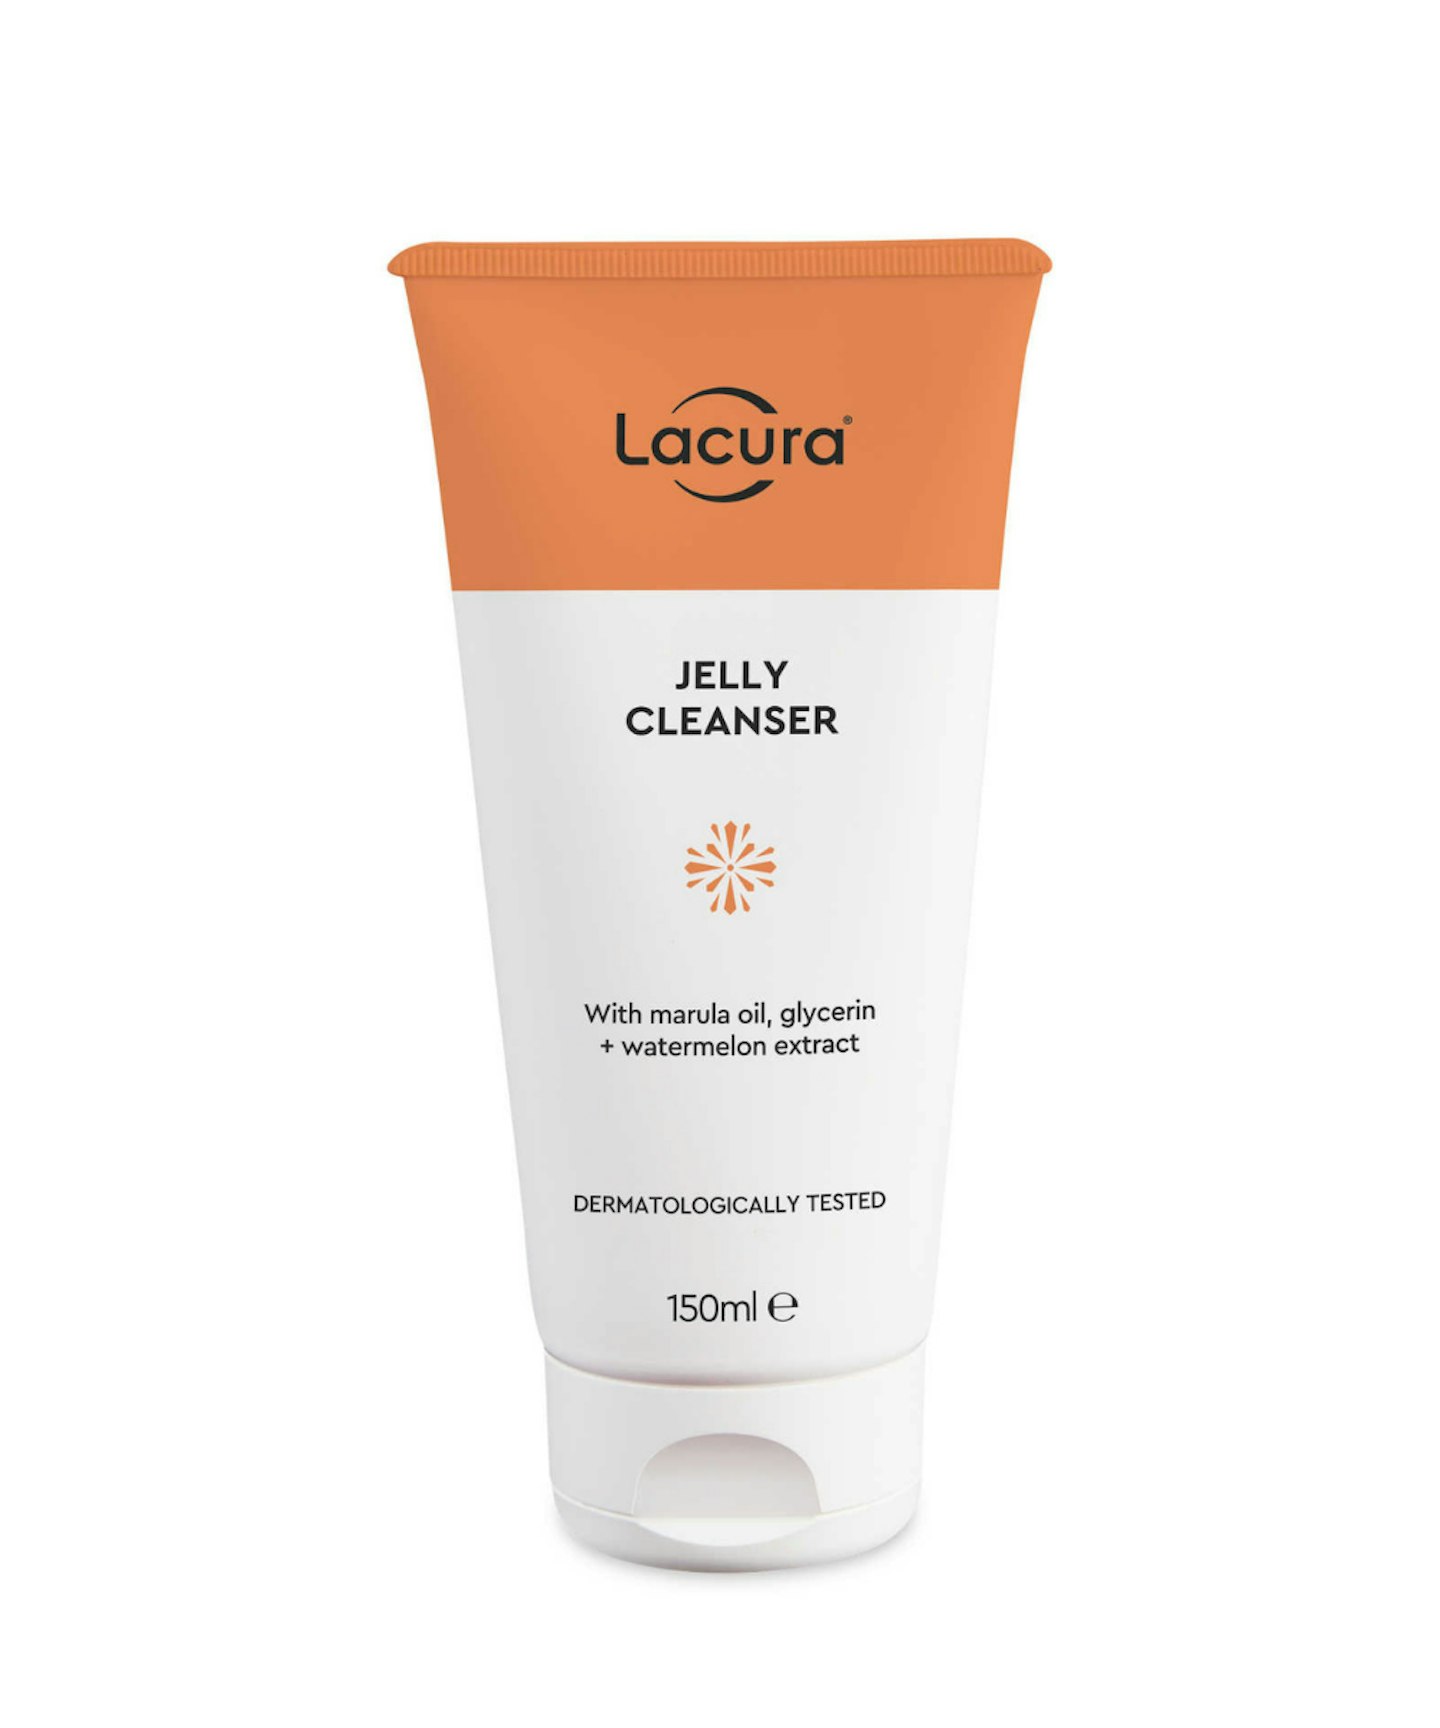 Lacura Jelly Cleanser